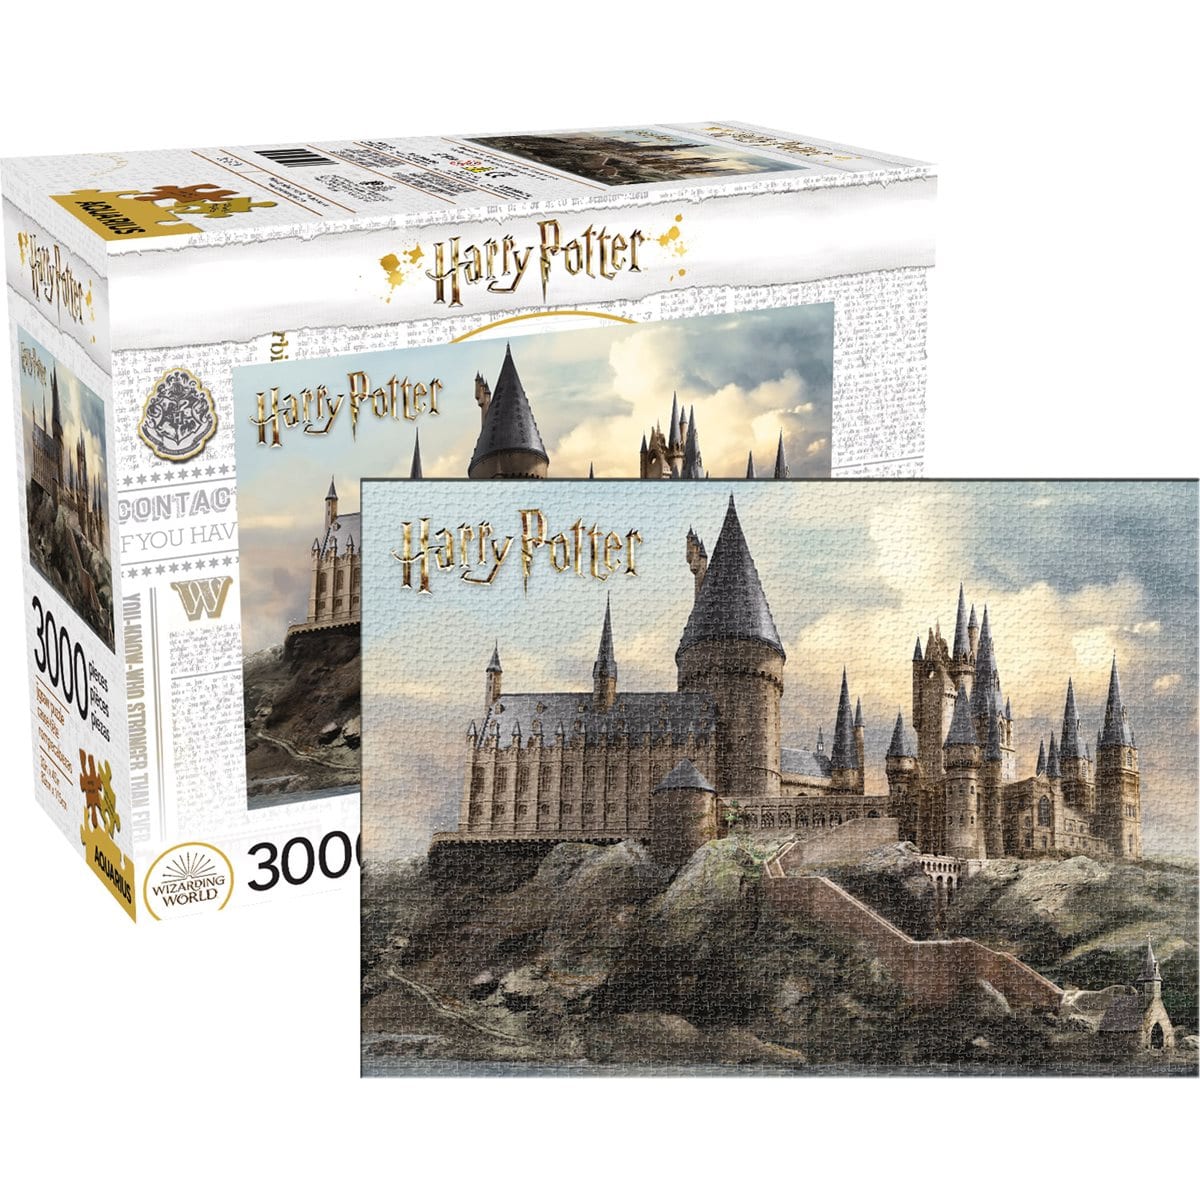 You Can Get A 3,000 Piece Harry Potter Hogwarts Puzzle, Accio It To Me!